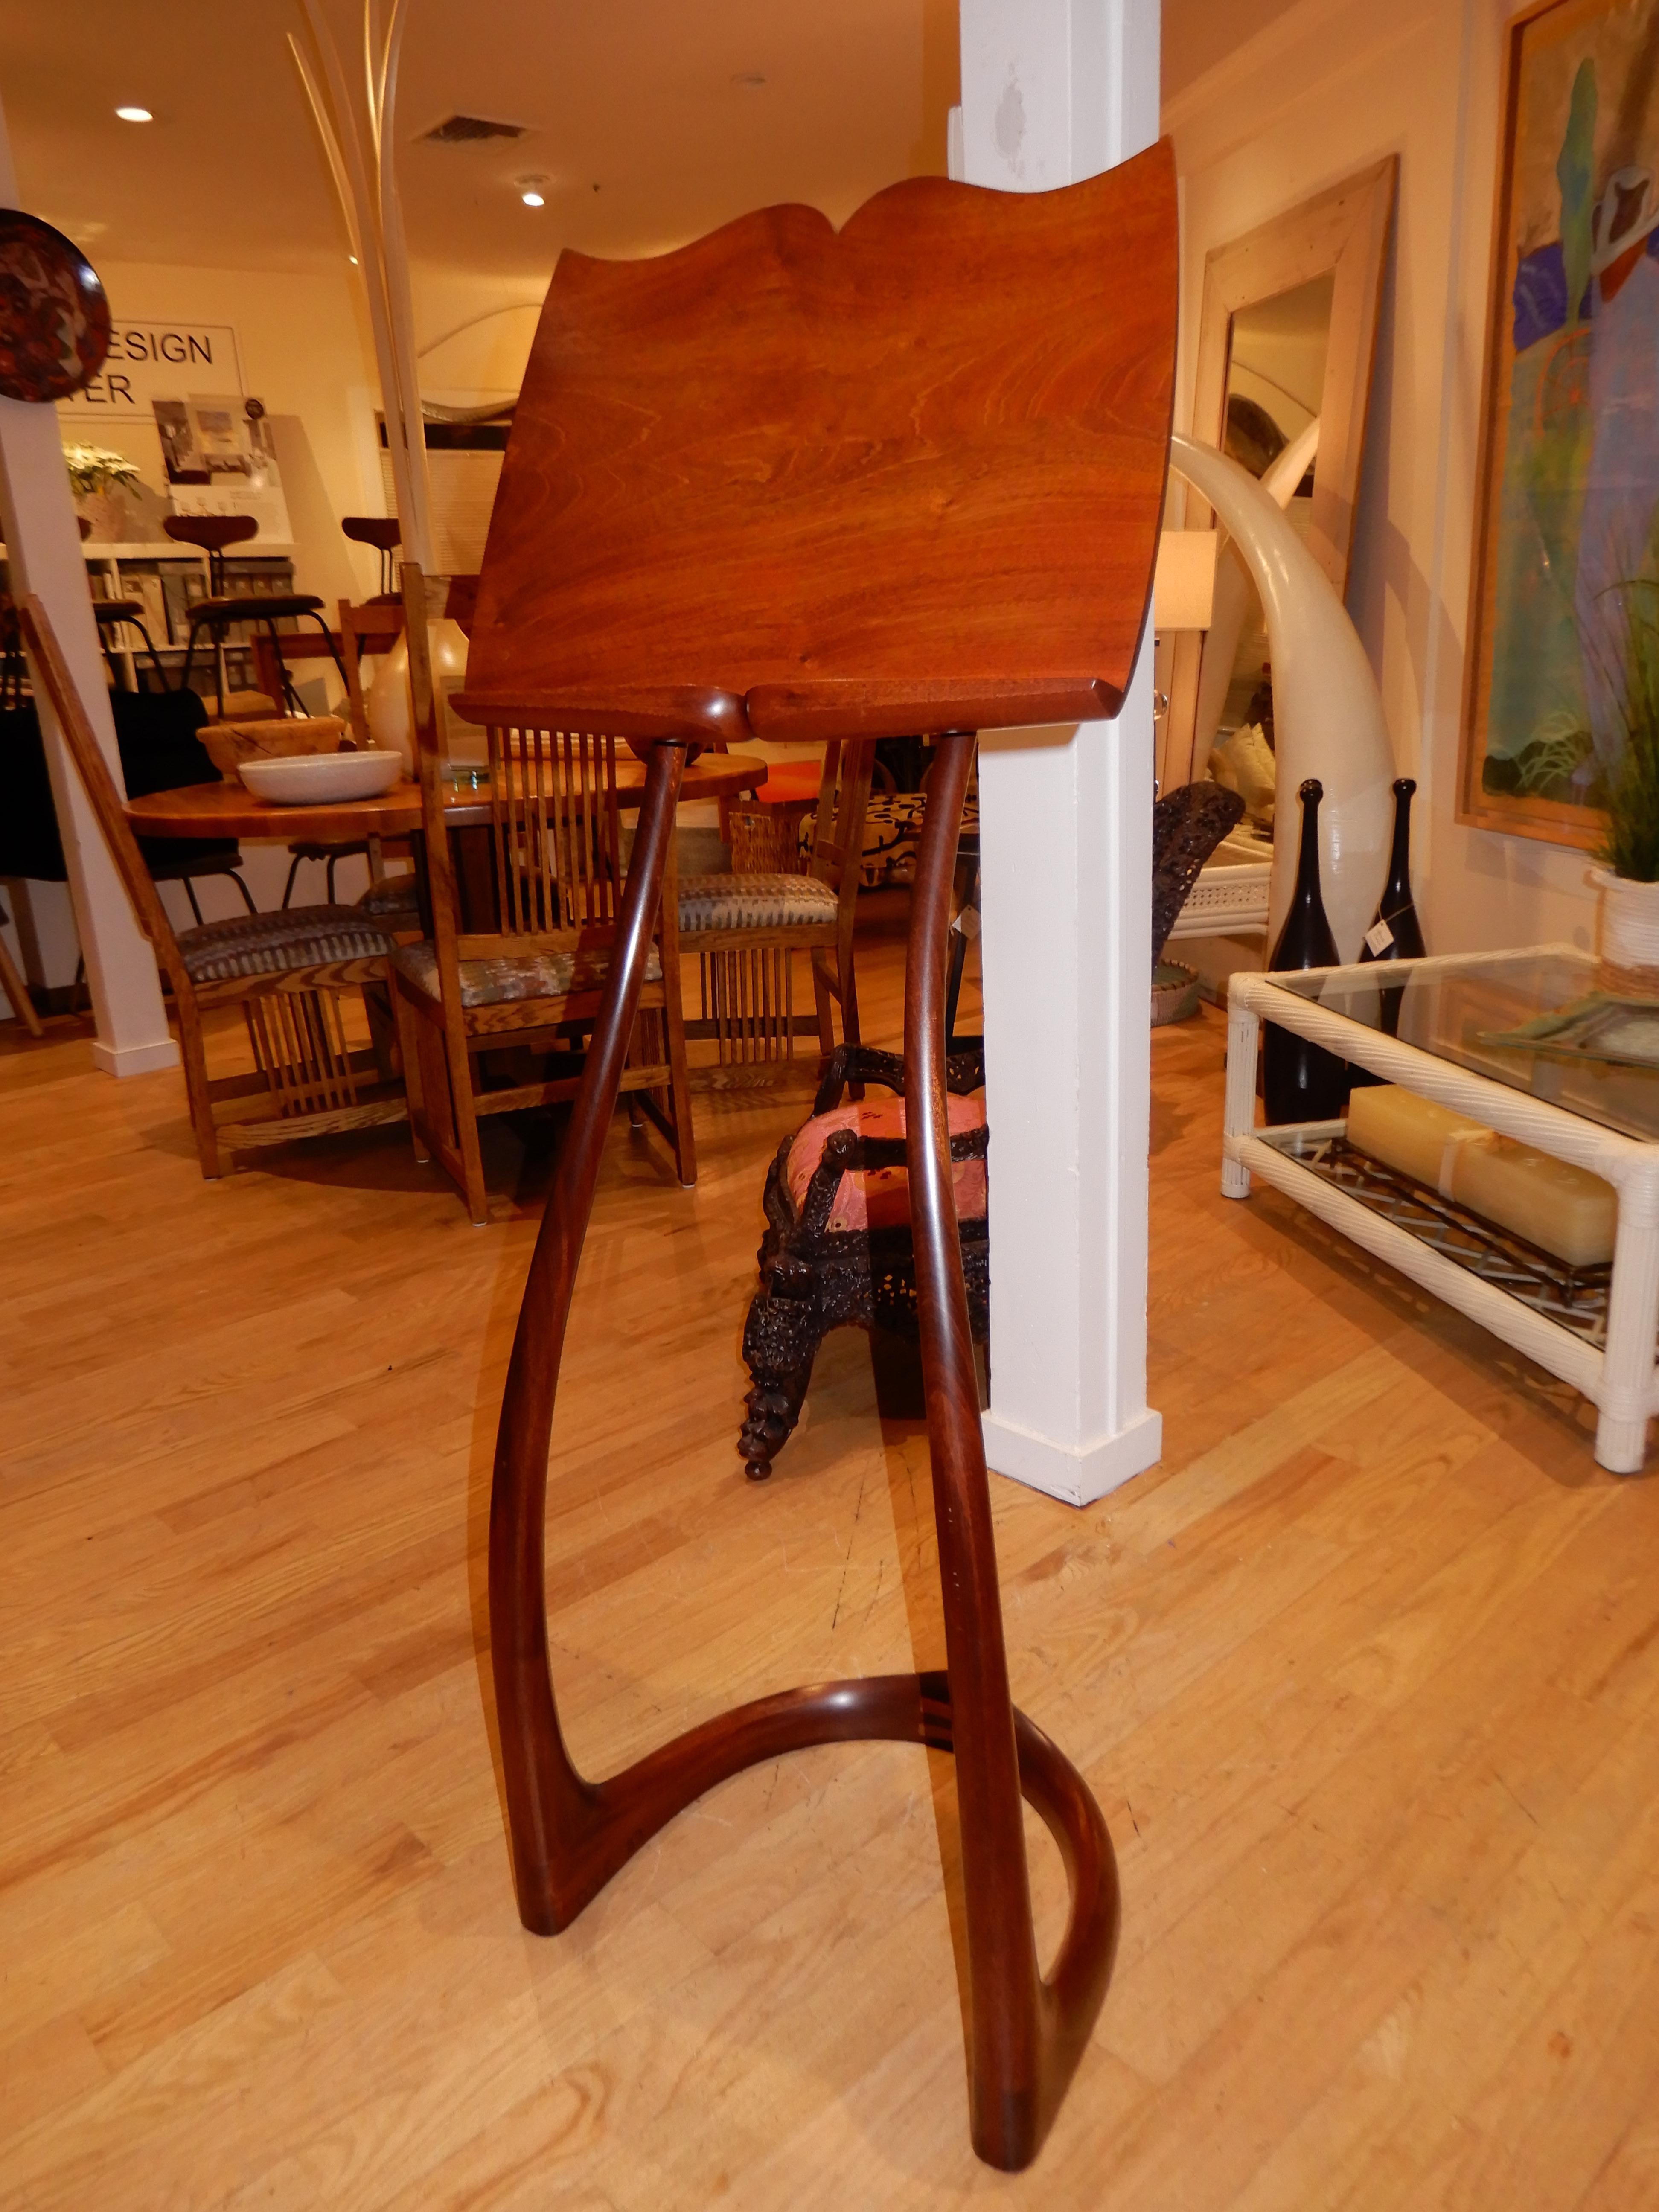 The Sternum Music Stand by David Ebner in Honduran Mahogany is a masterful piece of Modern Studio Crafted Furniture. from one of the leaders in this studio craft movement.
Highly collectable, this stand  is part of the Sternum Vintage Collection,a